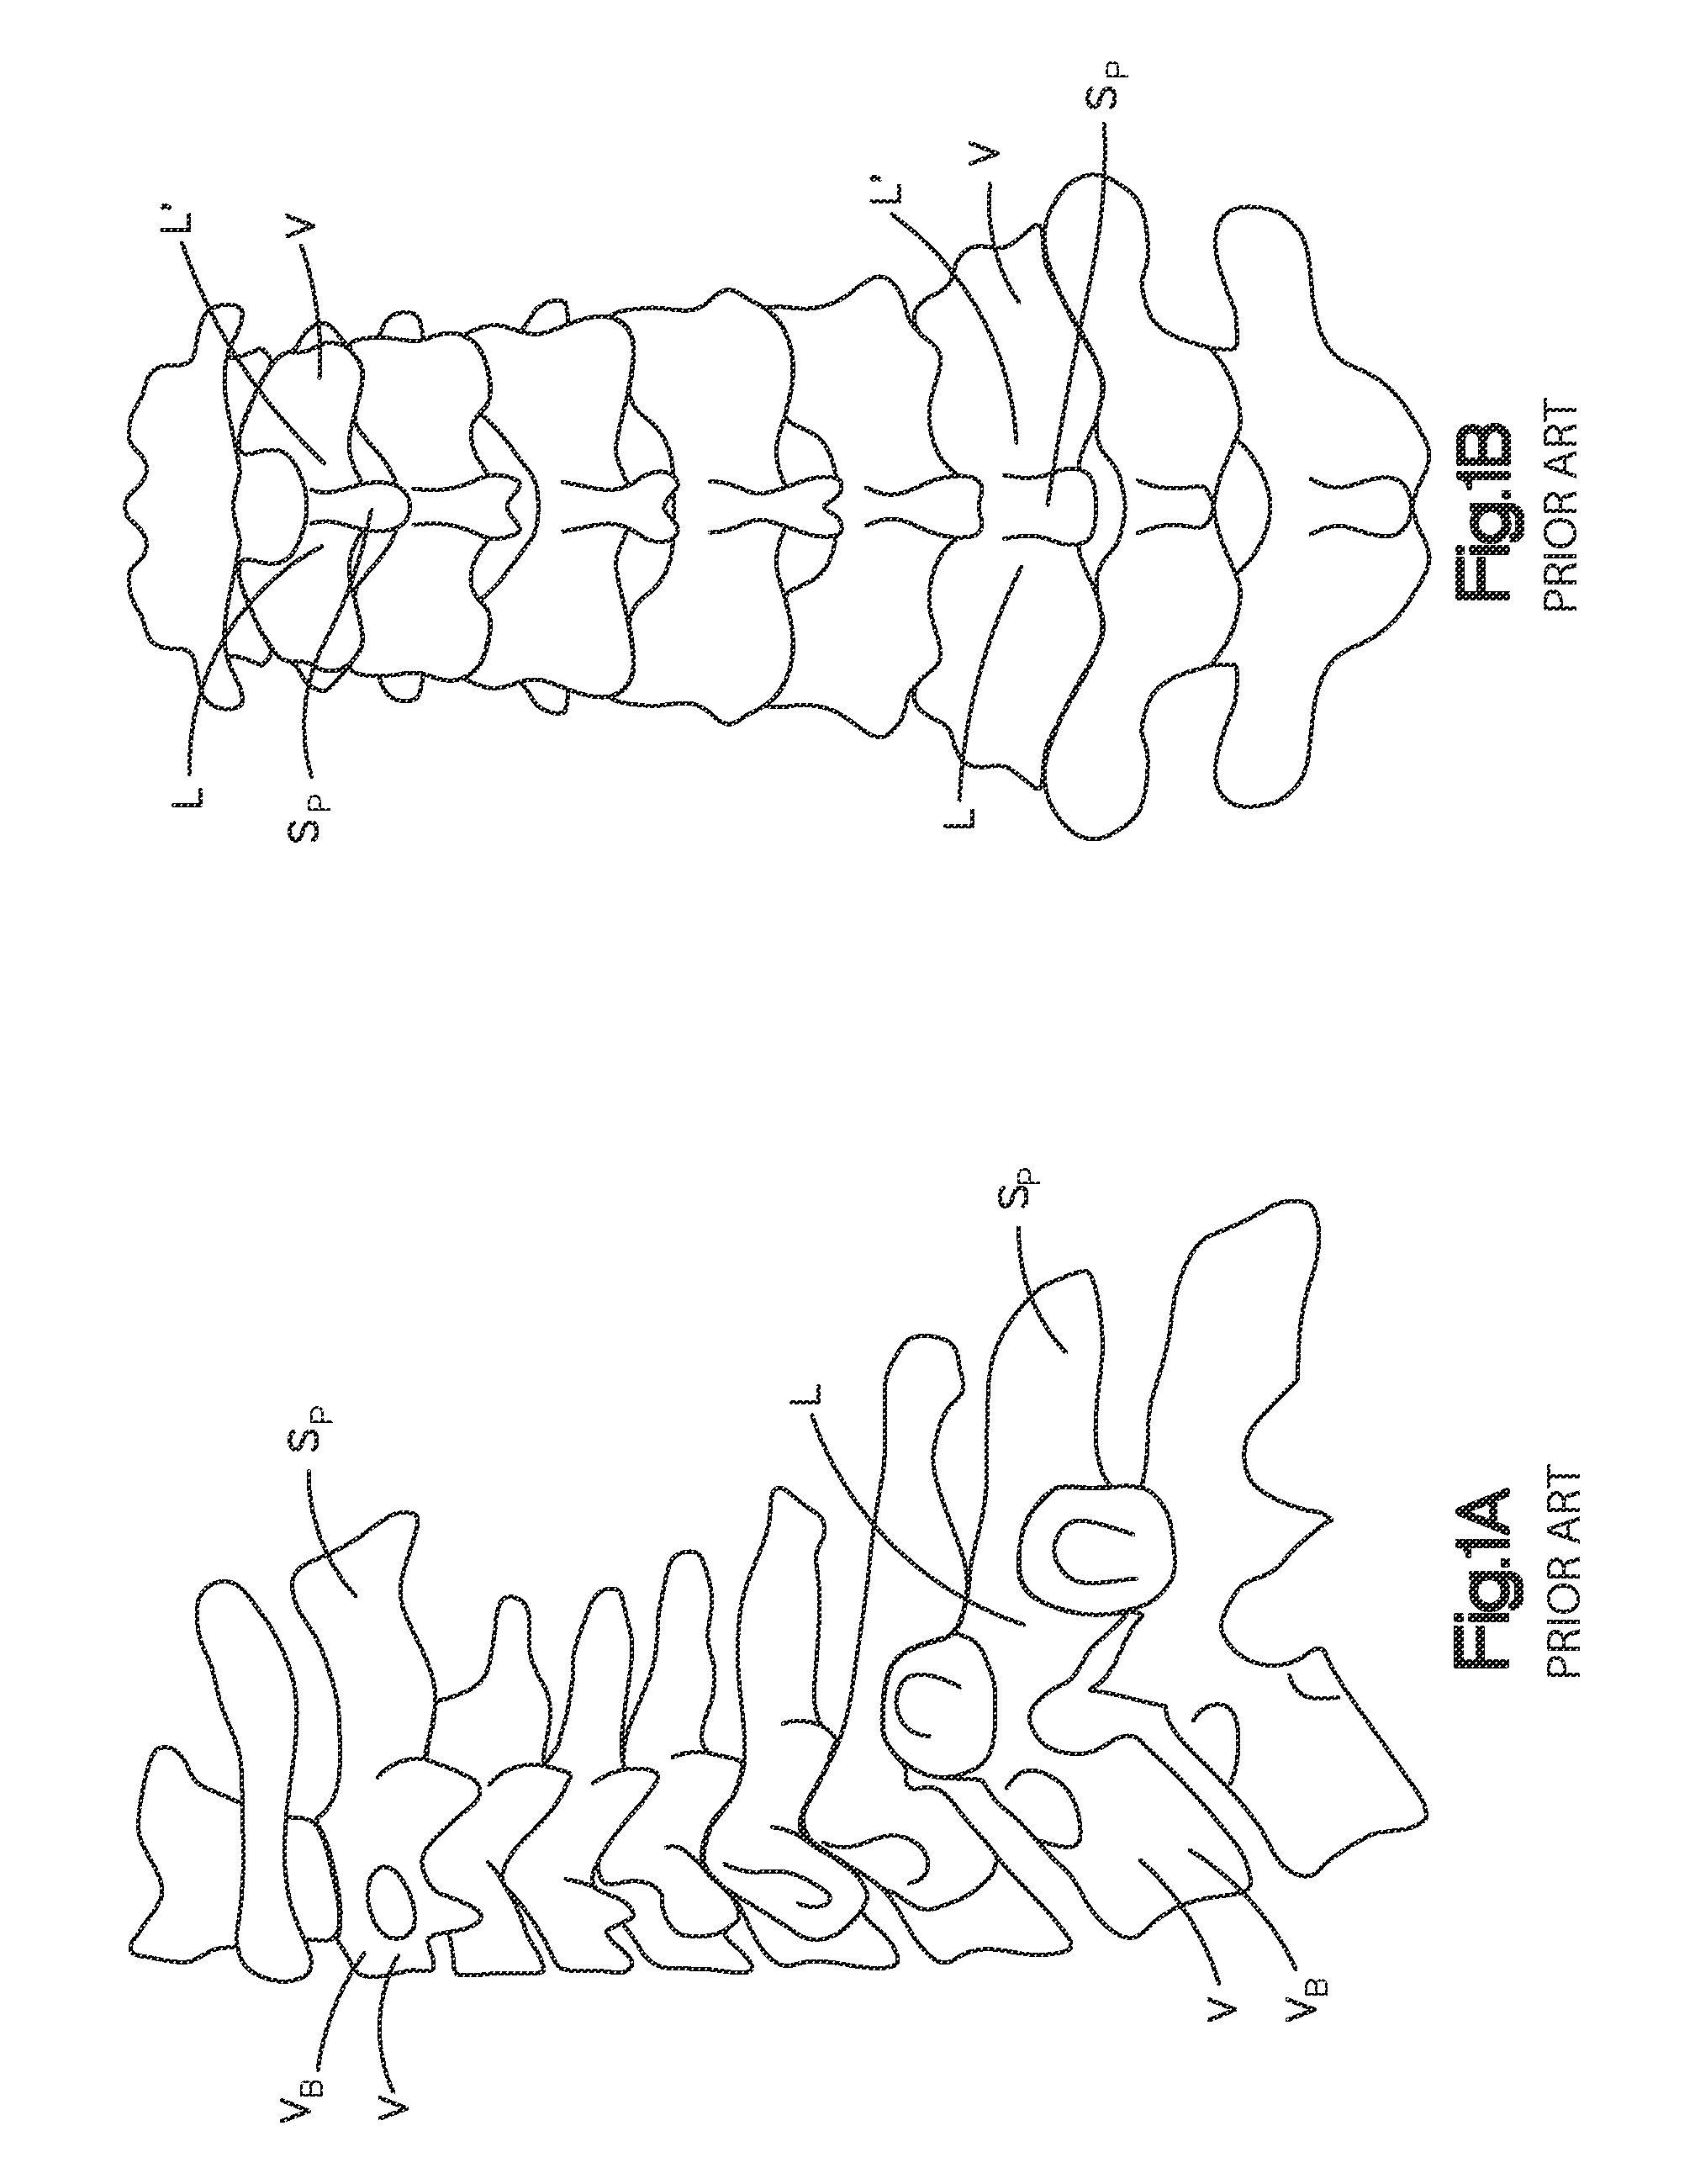 Spine stabilization system and method